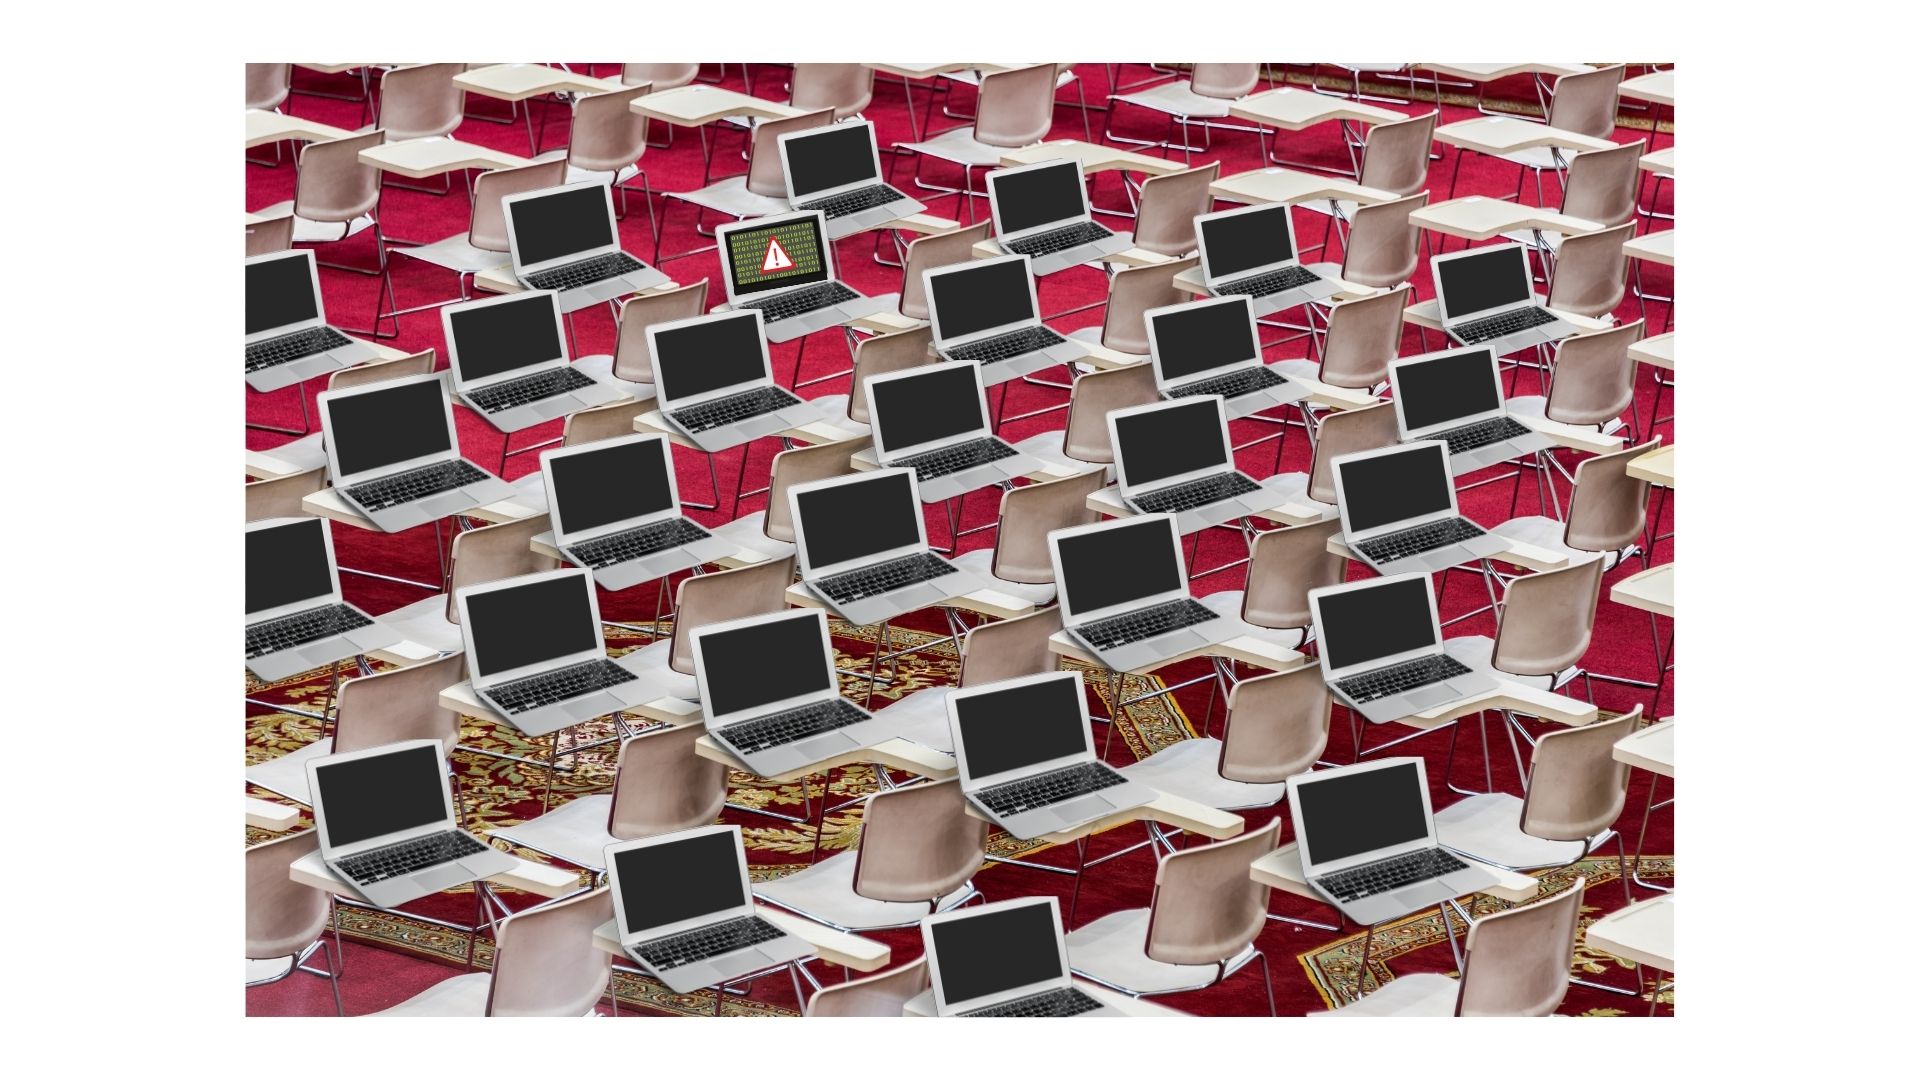 Image: A classroom full of computers, one of which has a virus.